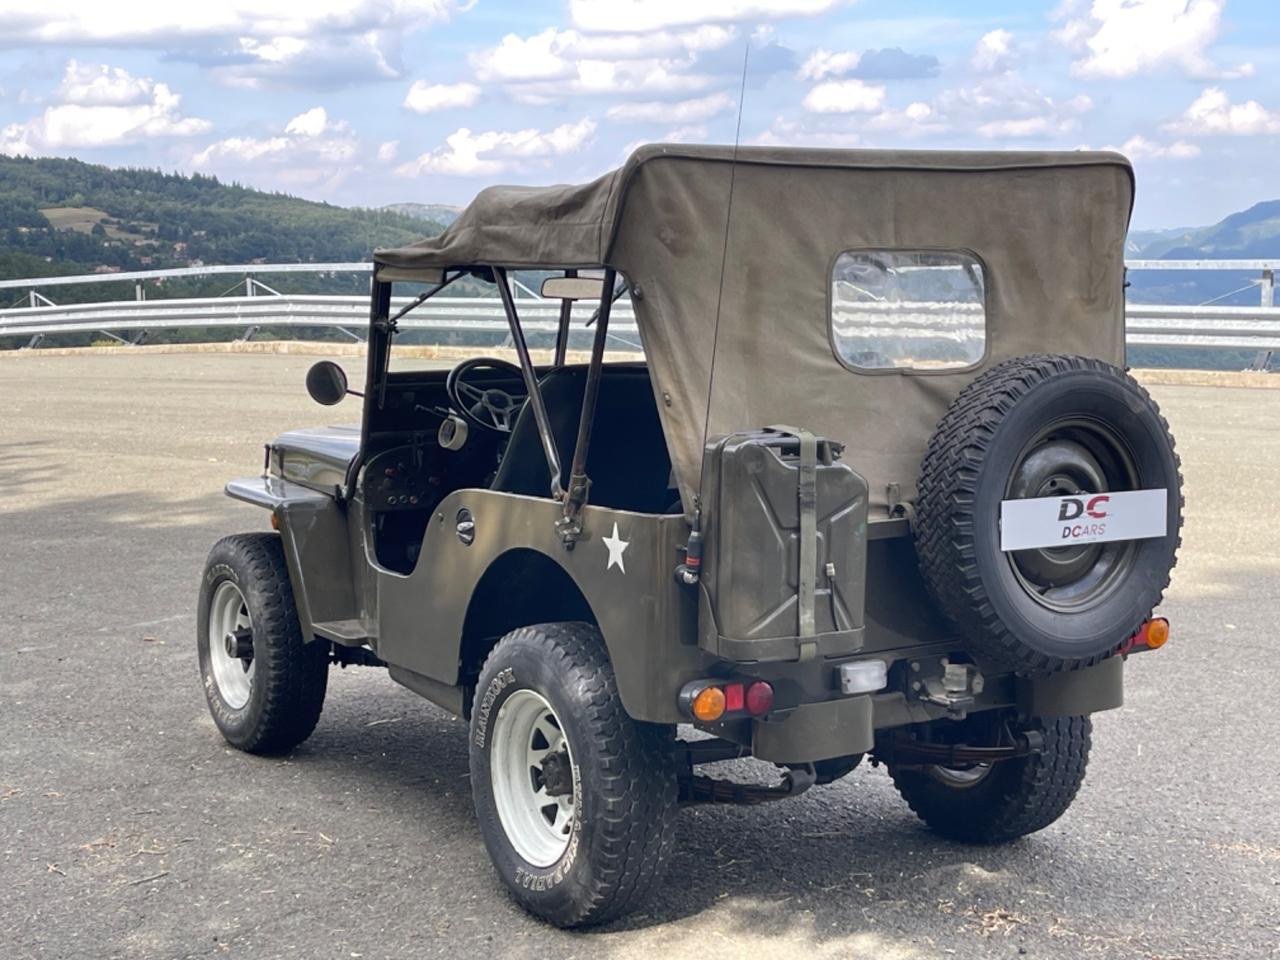 ford Jeep MB Willys